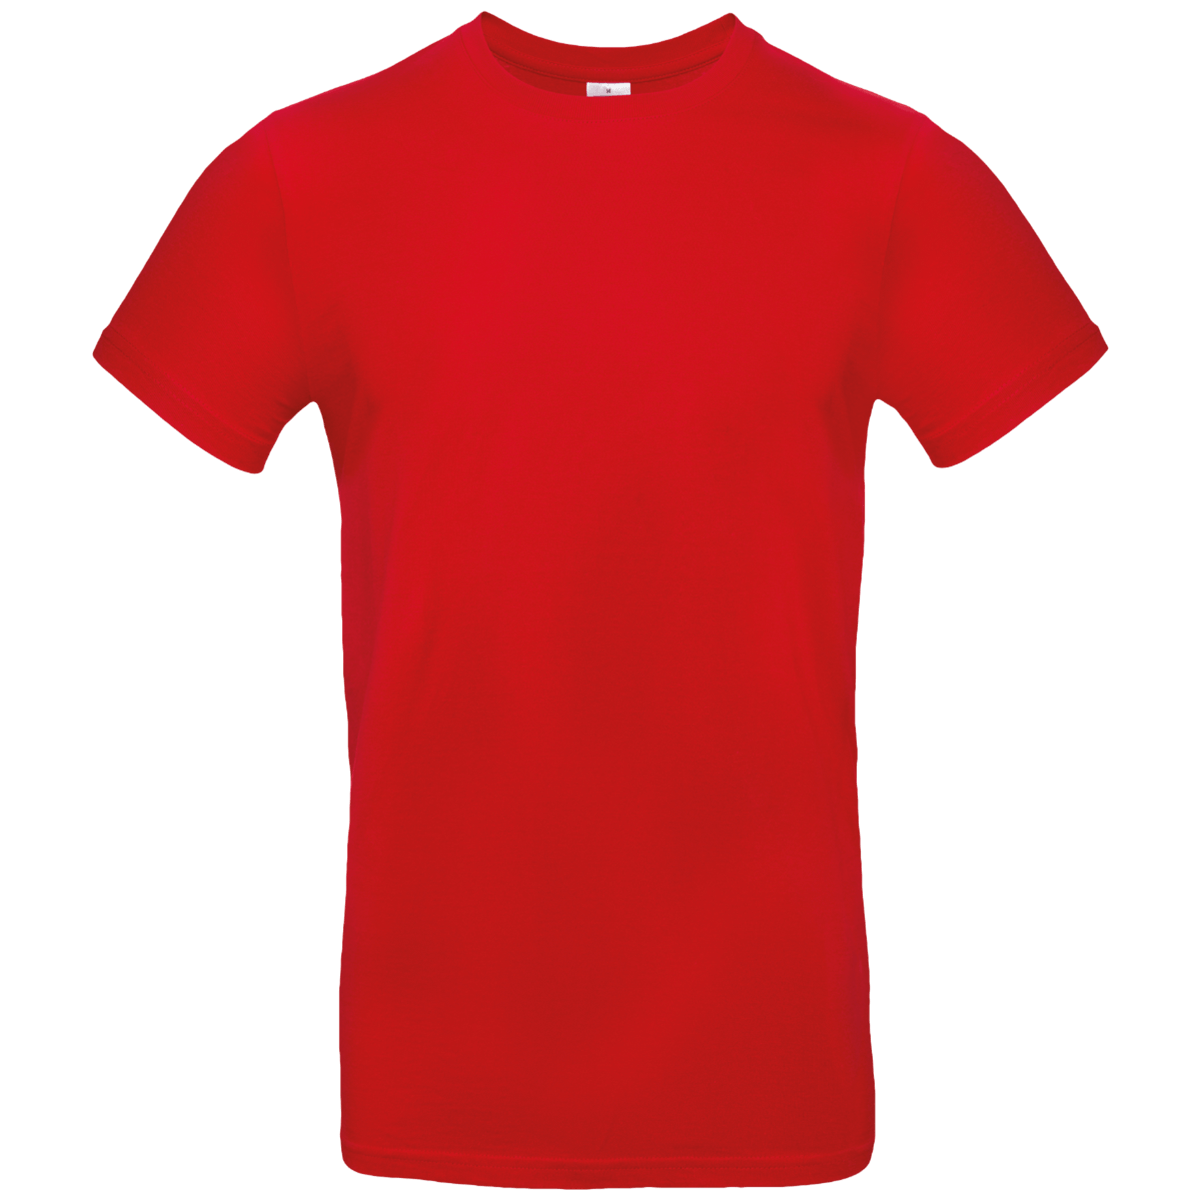 Tee-Shirt Homme Personnalisable Sur Tunetoo Fire Red